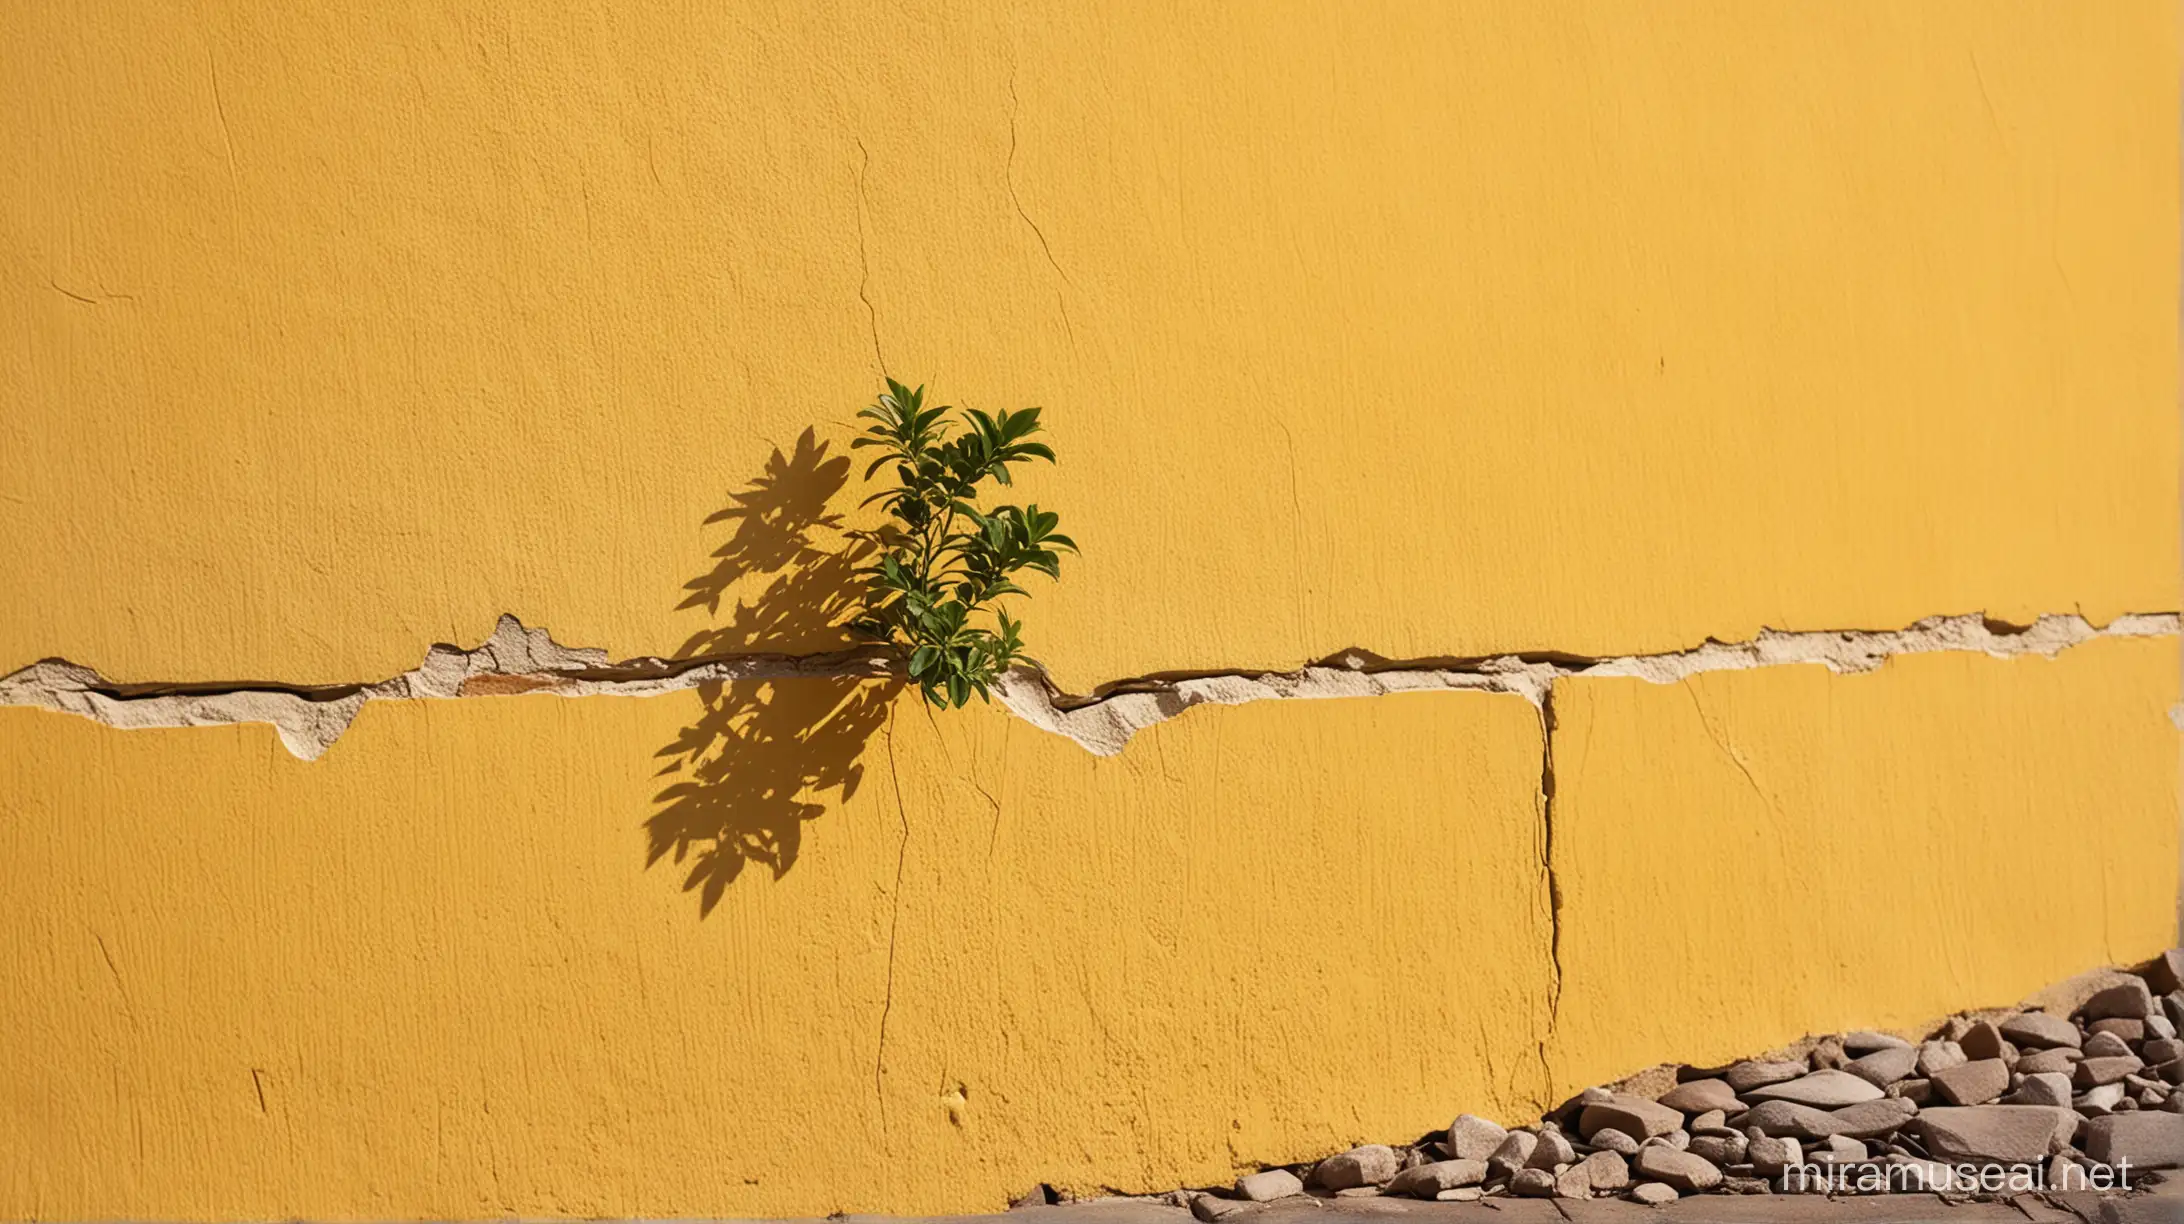 Sunlit Cracked Yellow Wall with Sprouting Greenery